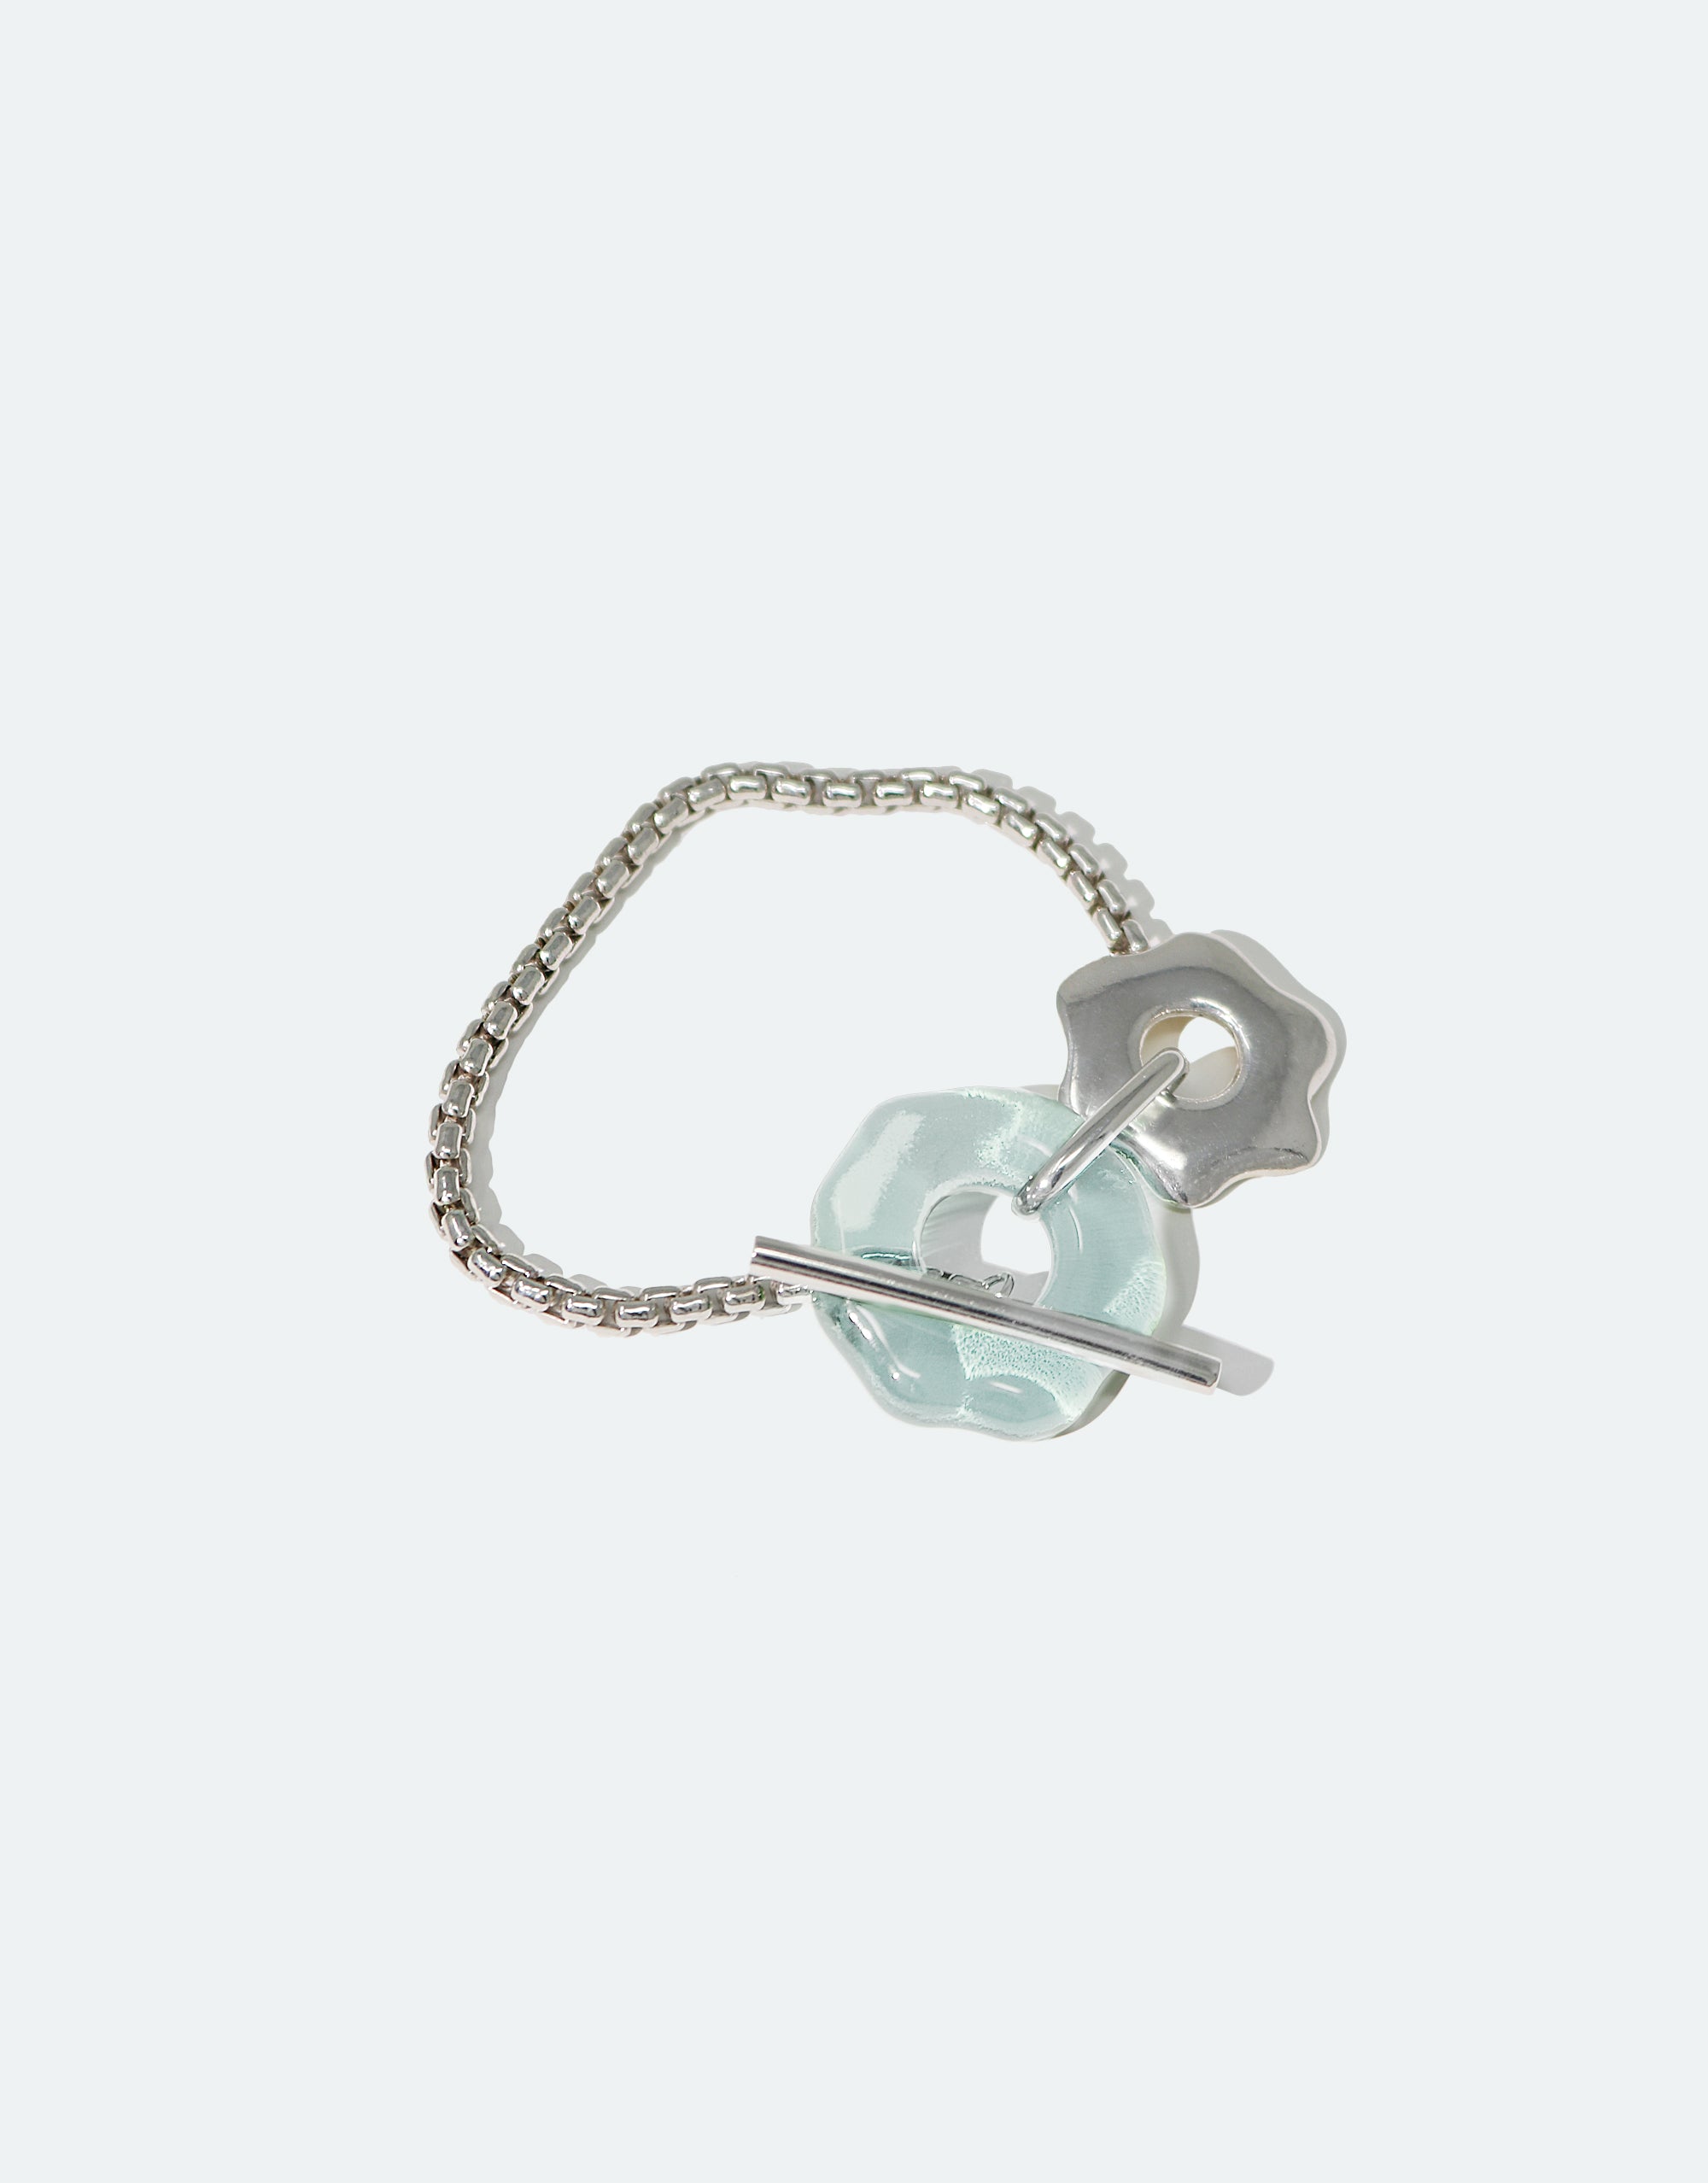 CLED Eco Conscious Sustainable upcycled jewelry made from Eco Gems and sterling silver from recycled glass | Avens Toggle Bracelet